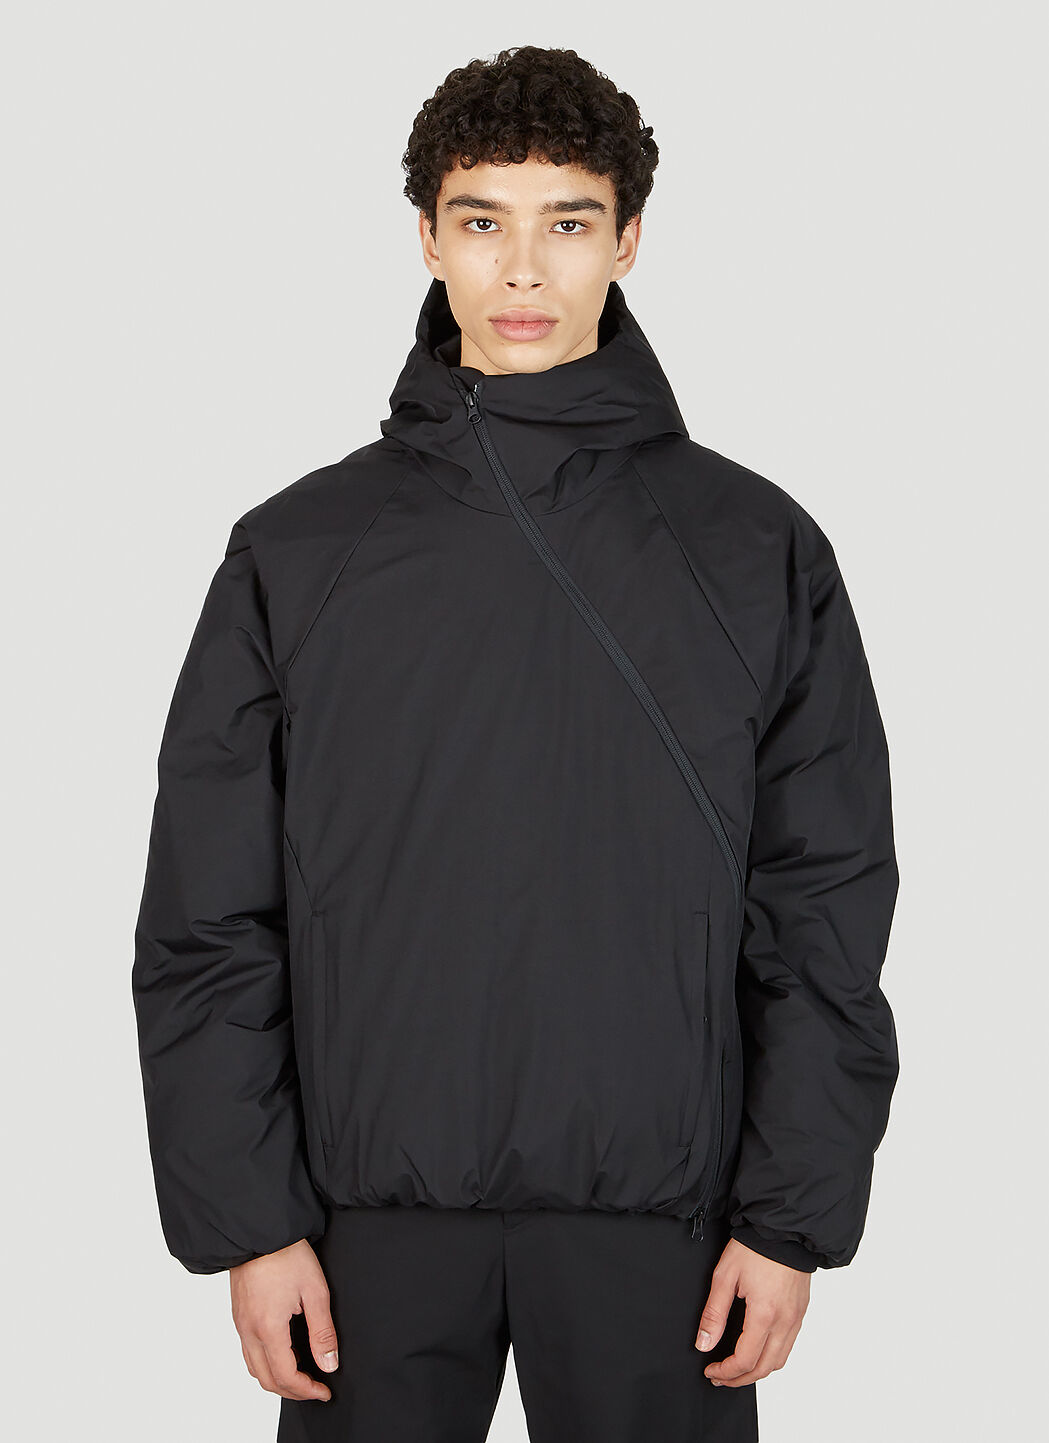 POST ARCHIVE FACTION (PAF) 5.0 Down Center Jacket in Black | LN-CC®